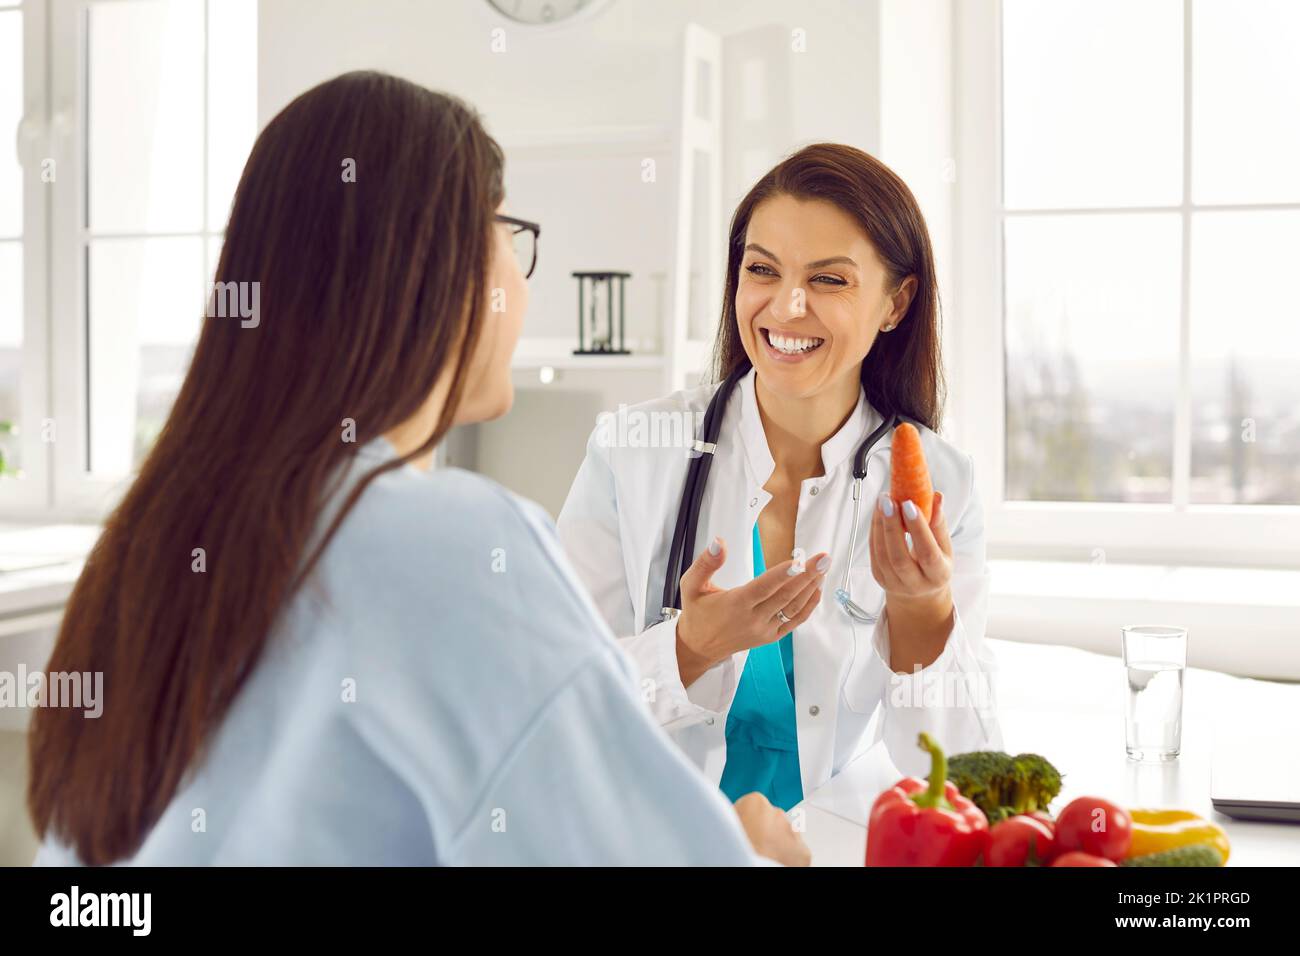 Happy doctor, dietitian or nutritionist giving nutrition consultation to young woman Stock Photo